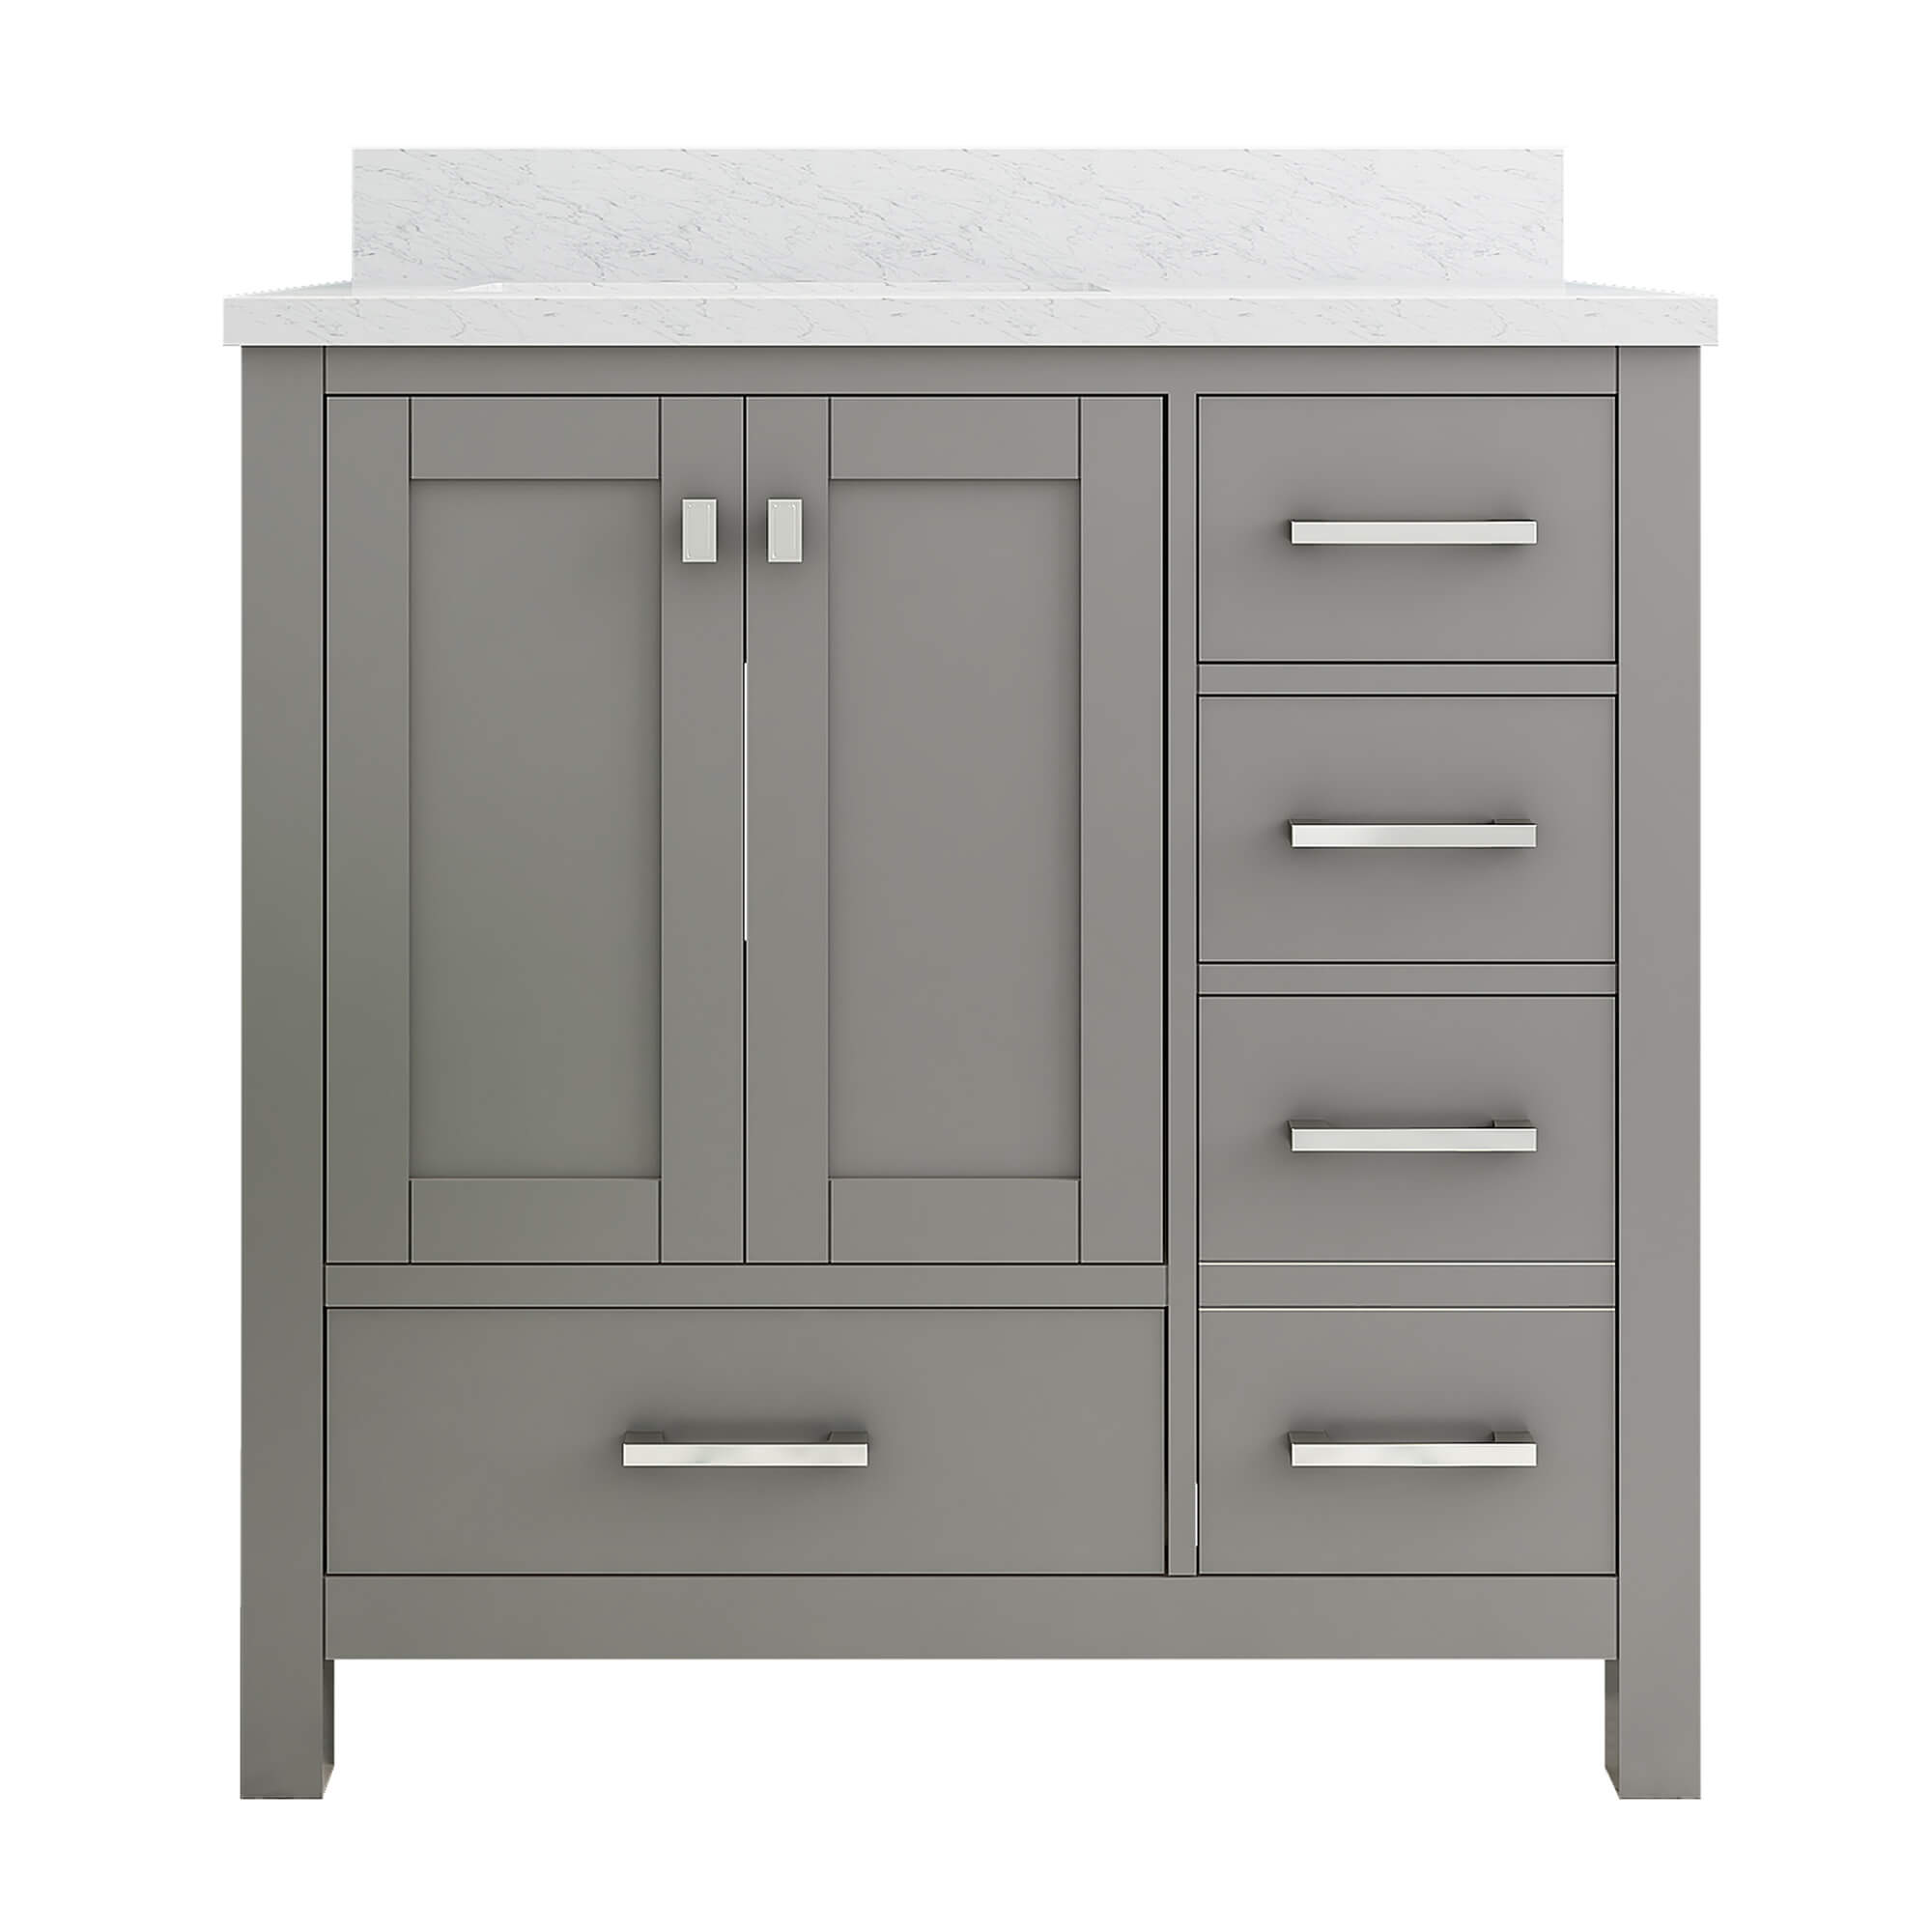 CASAINC 36 x 22 x 35.4 in. Solid Wood Bath Vanity with Carrara White Marble Countertop in Gray/White